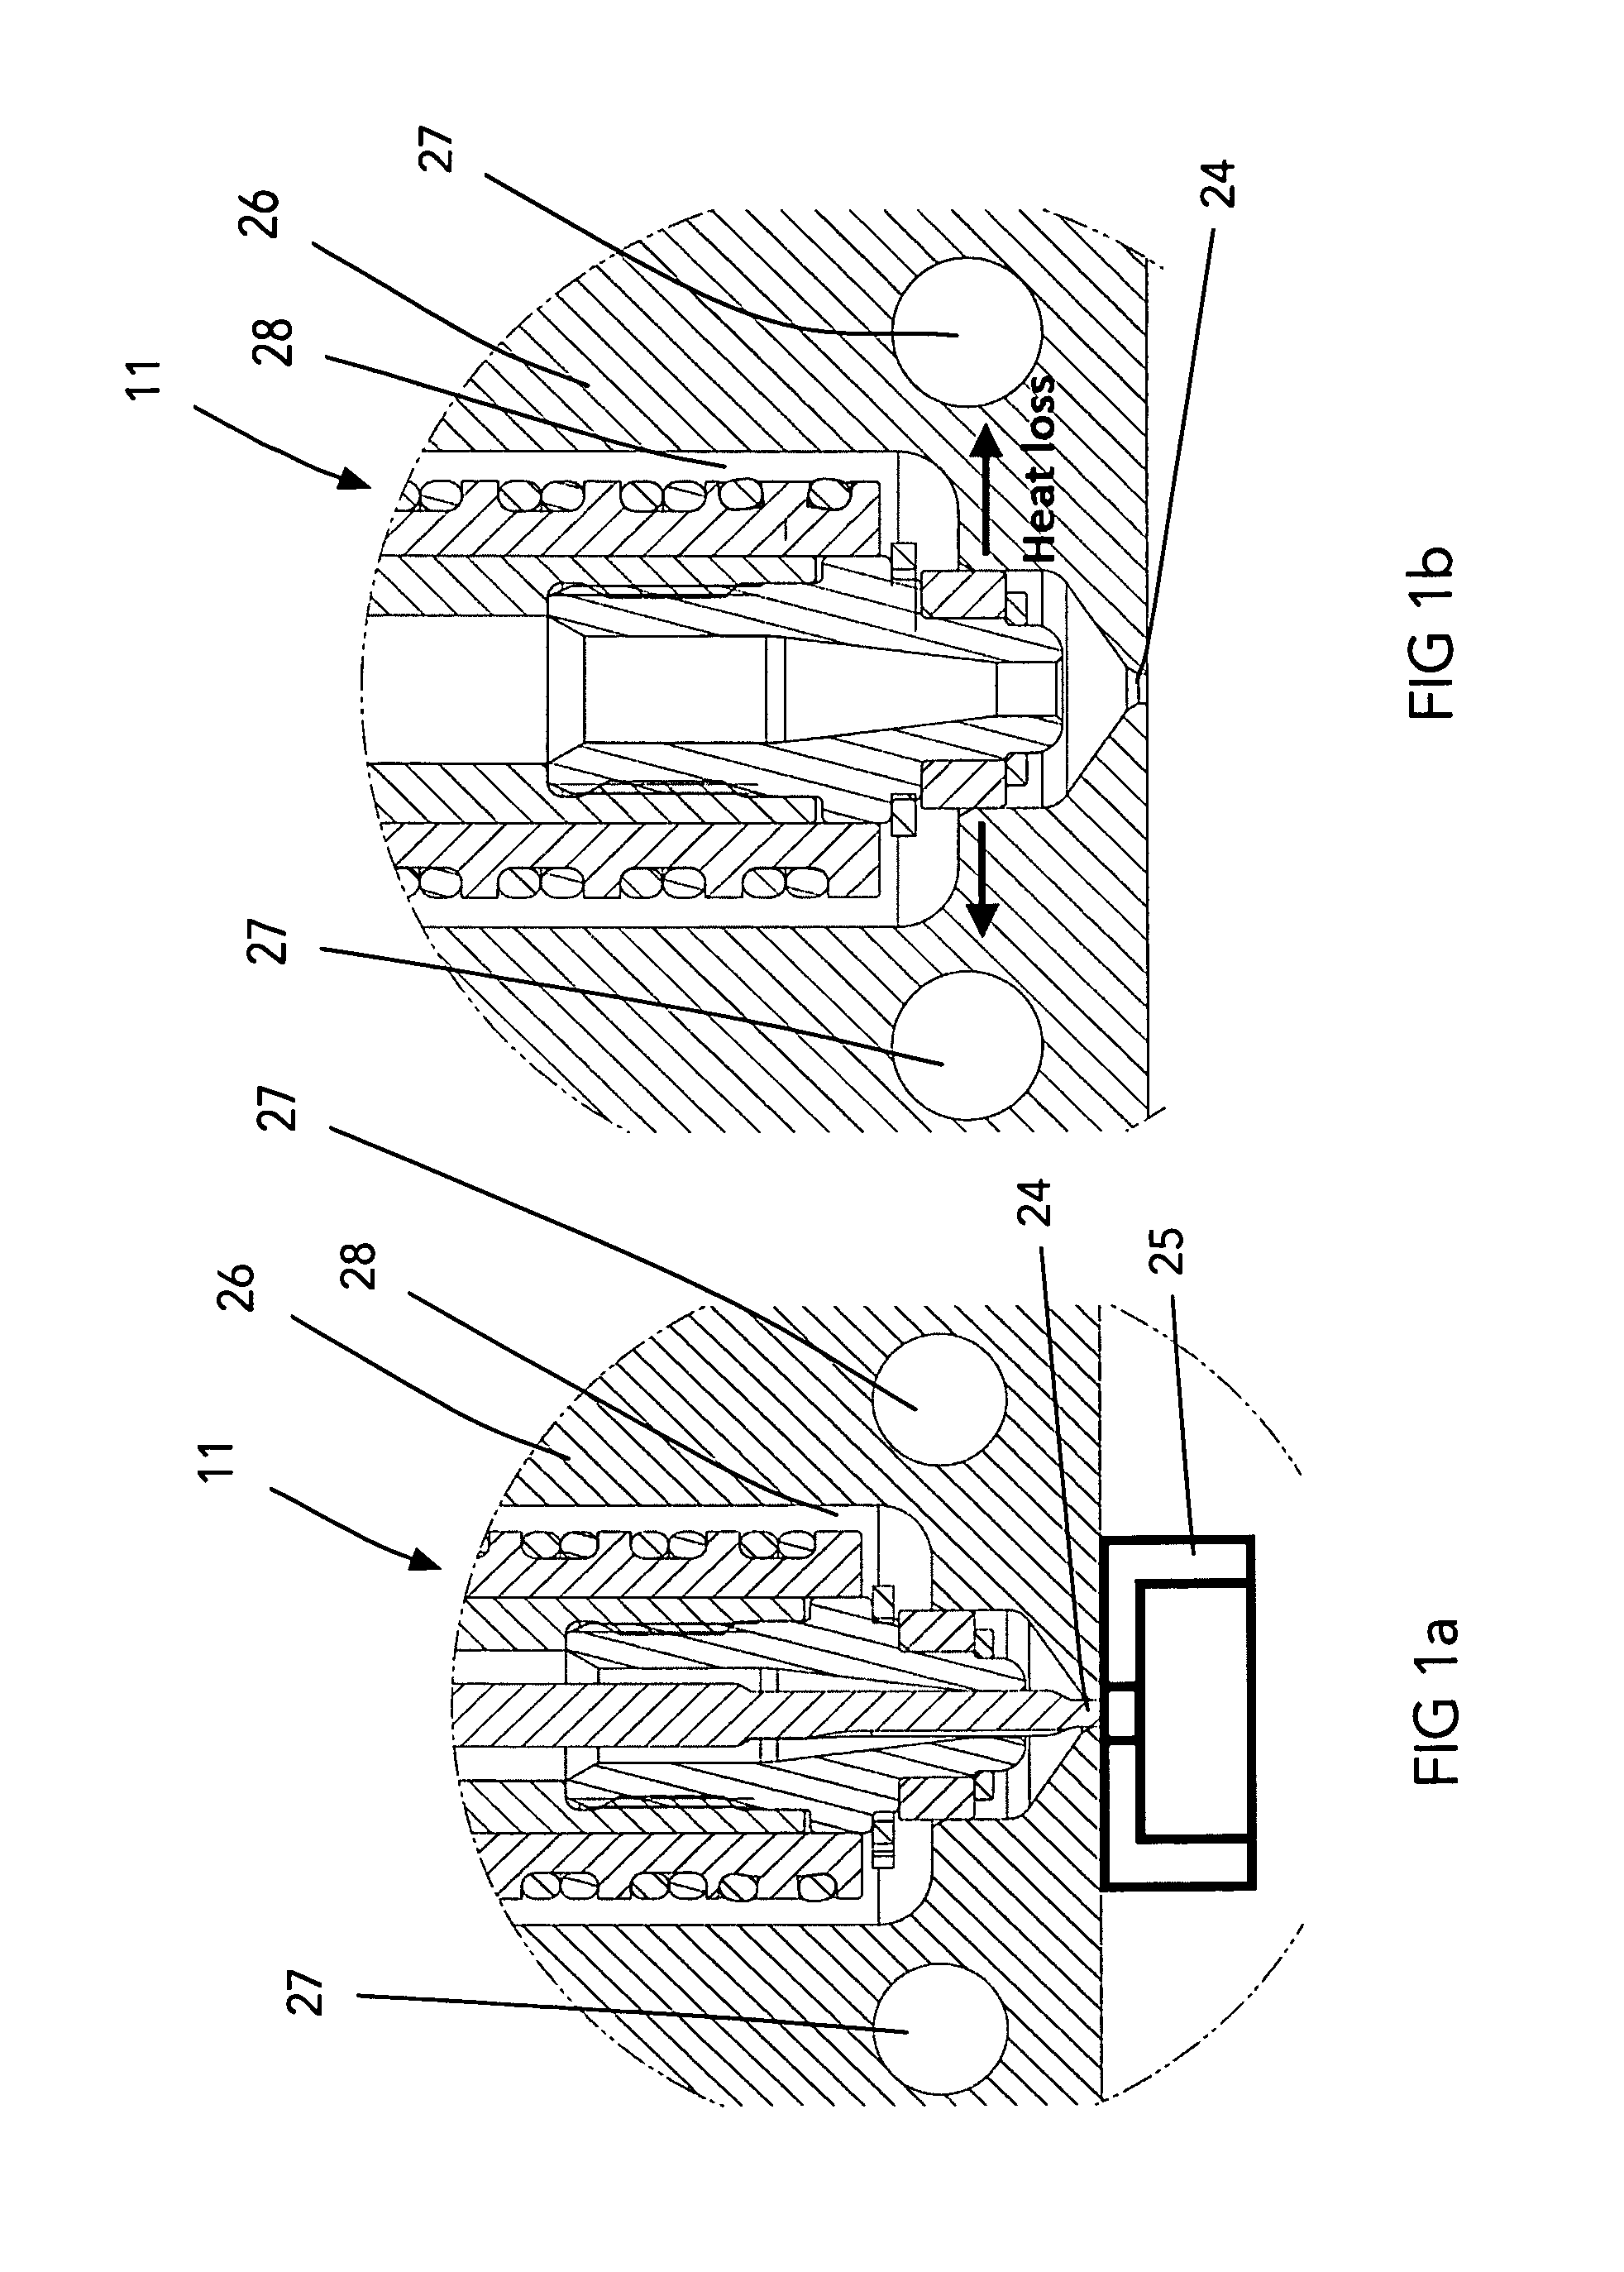 Injection nozzle with multi-piece tip portion